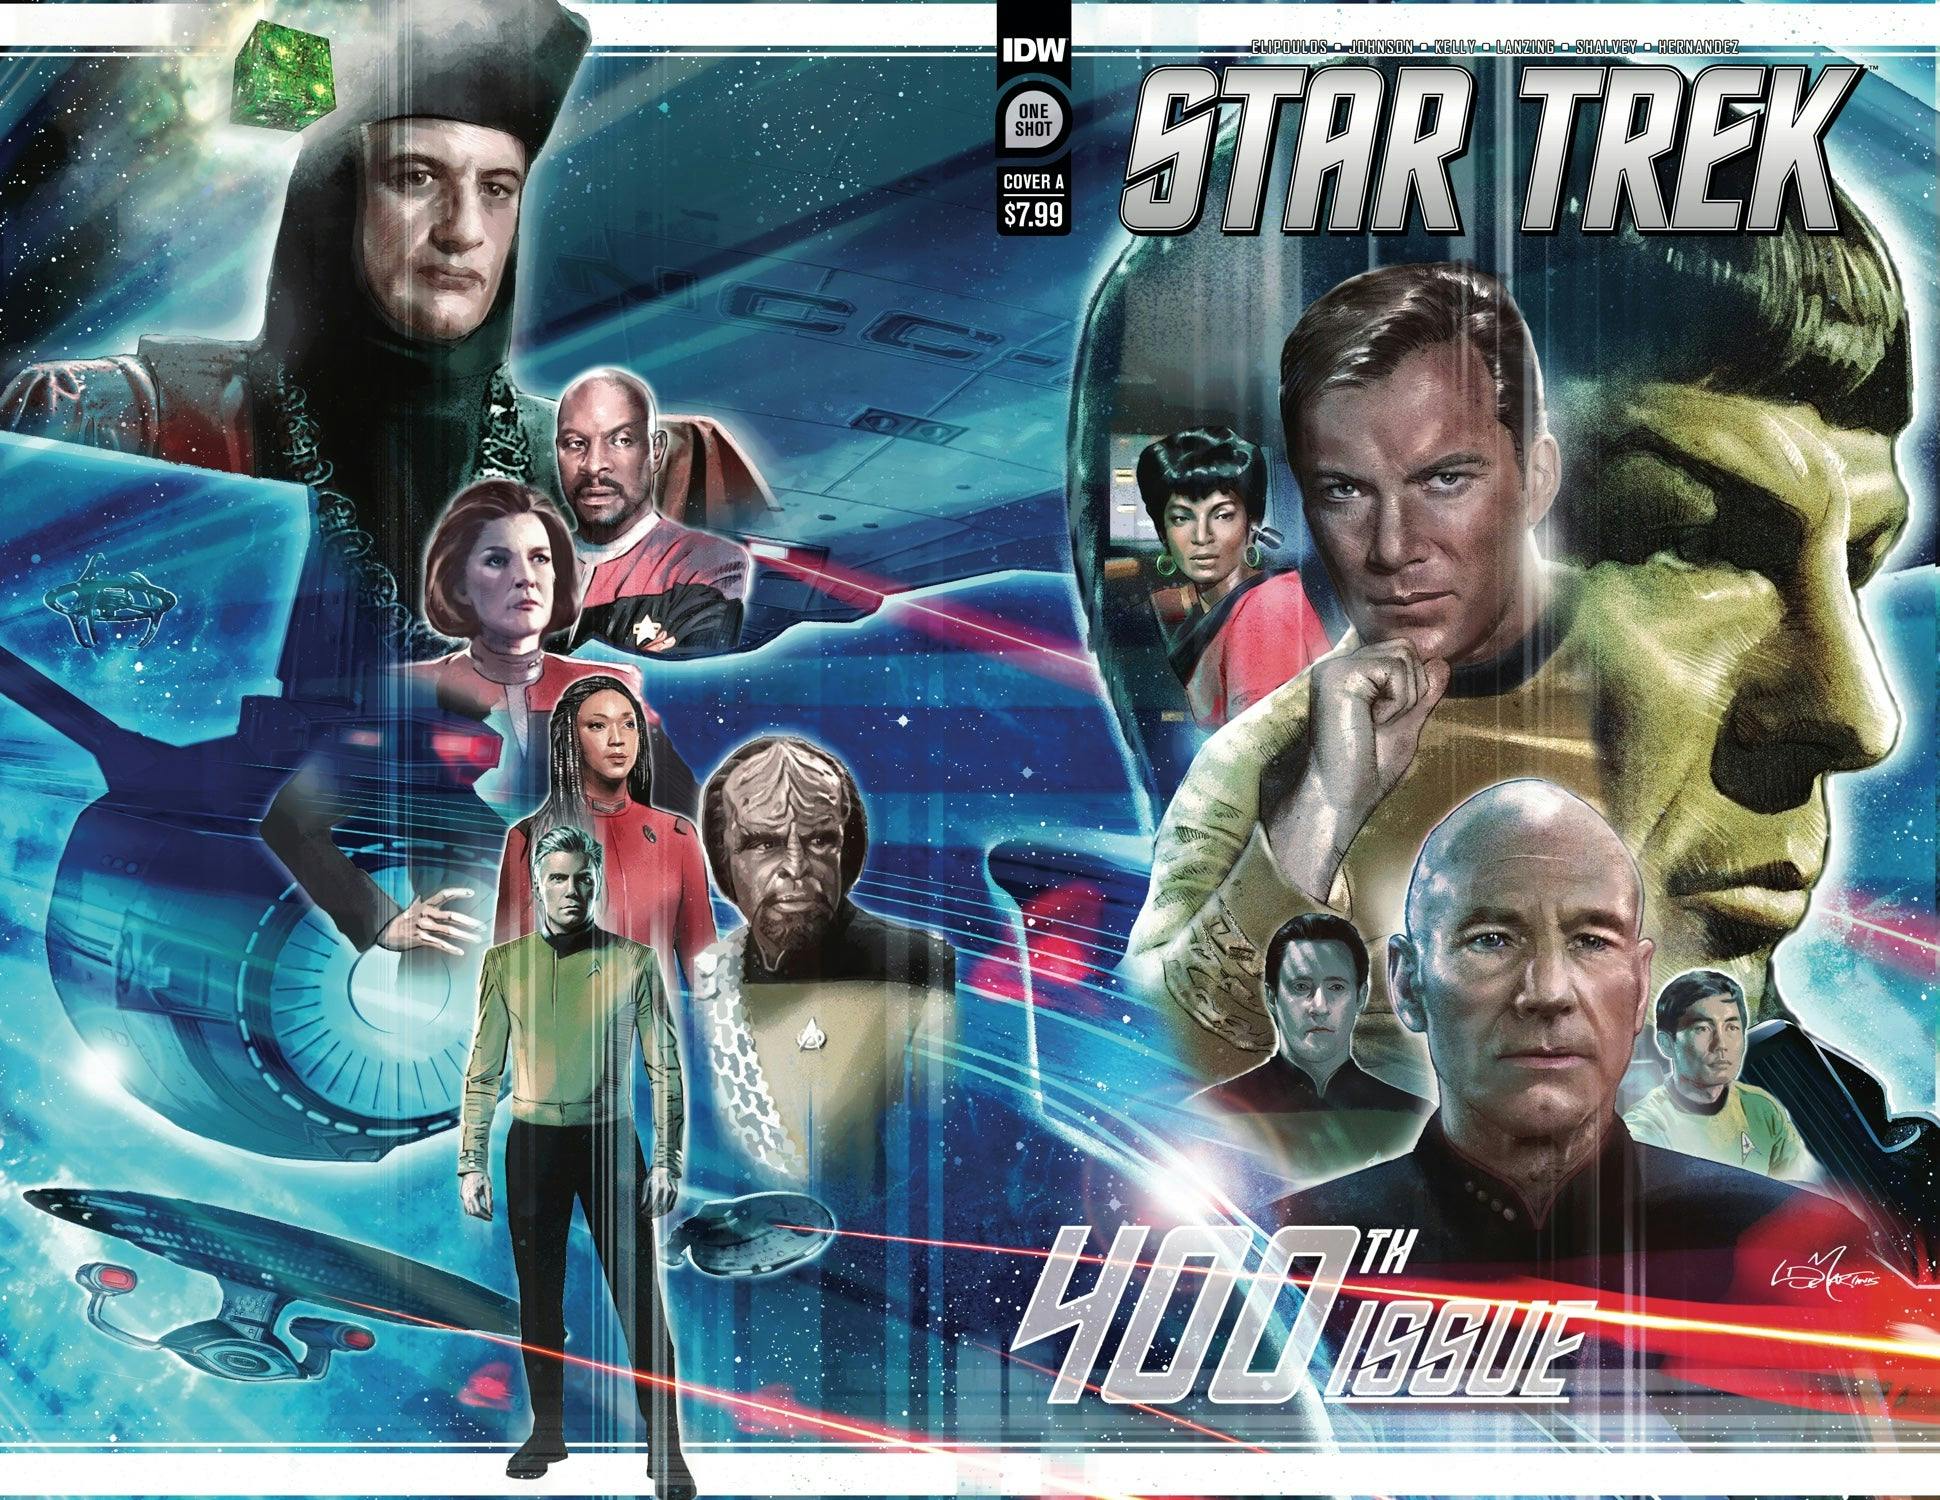 The first cover for Star Trek 400, which features a variety of characters from across the franchise.